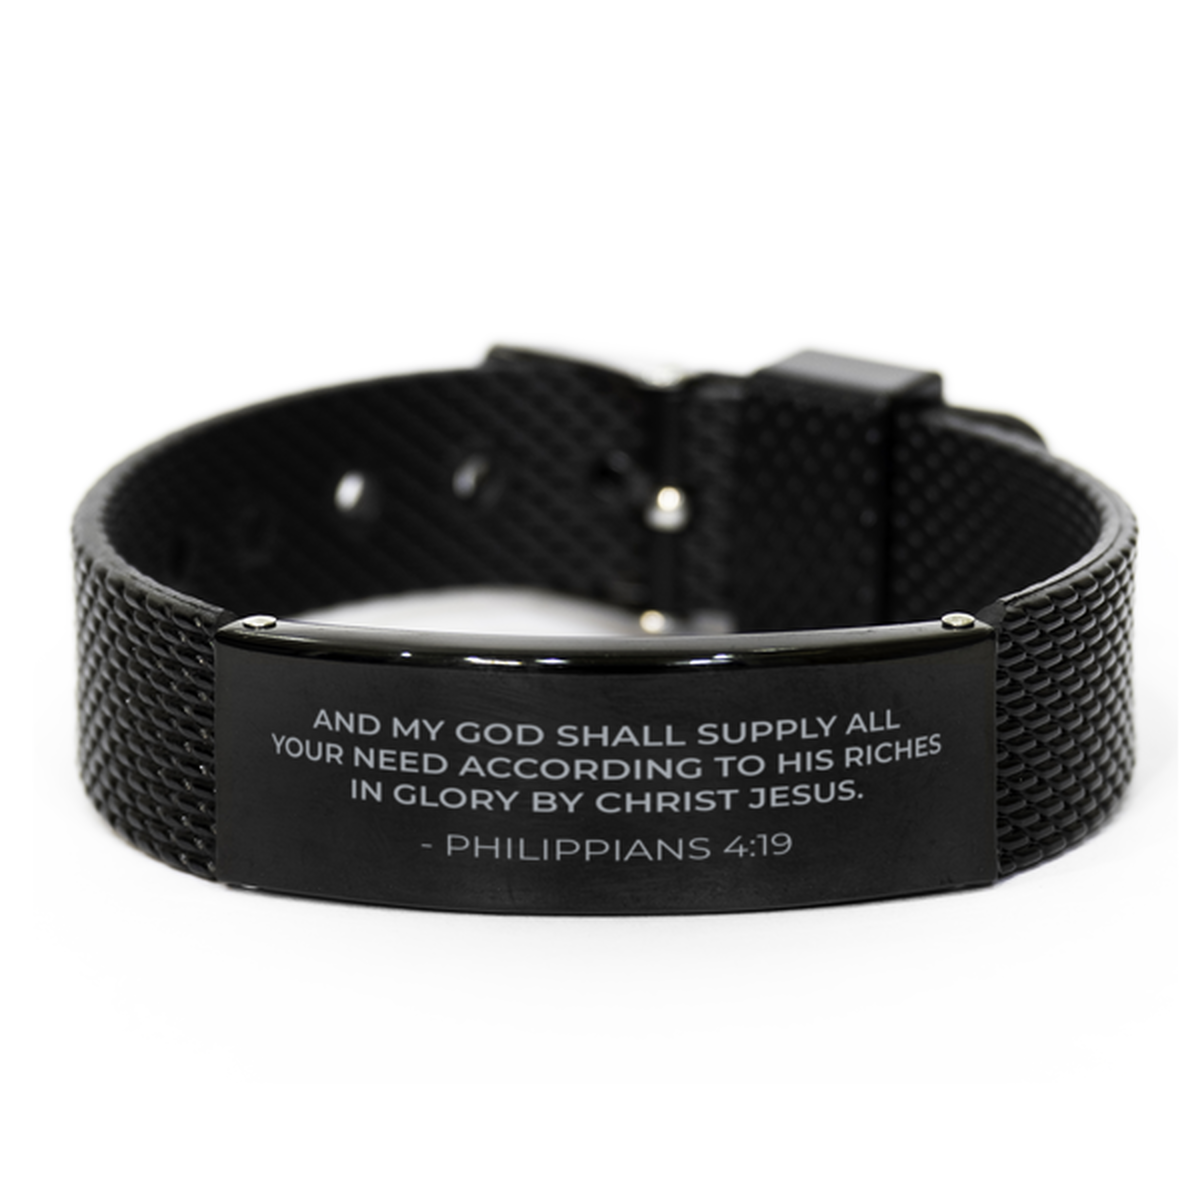 Christian Black Bracelet,, Philippians 4:19 And My God Shall Supply All Your Need According, Motivational Bible Verse Gifts For Men Women